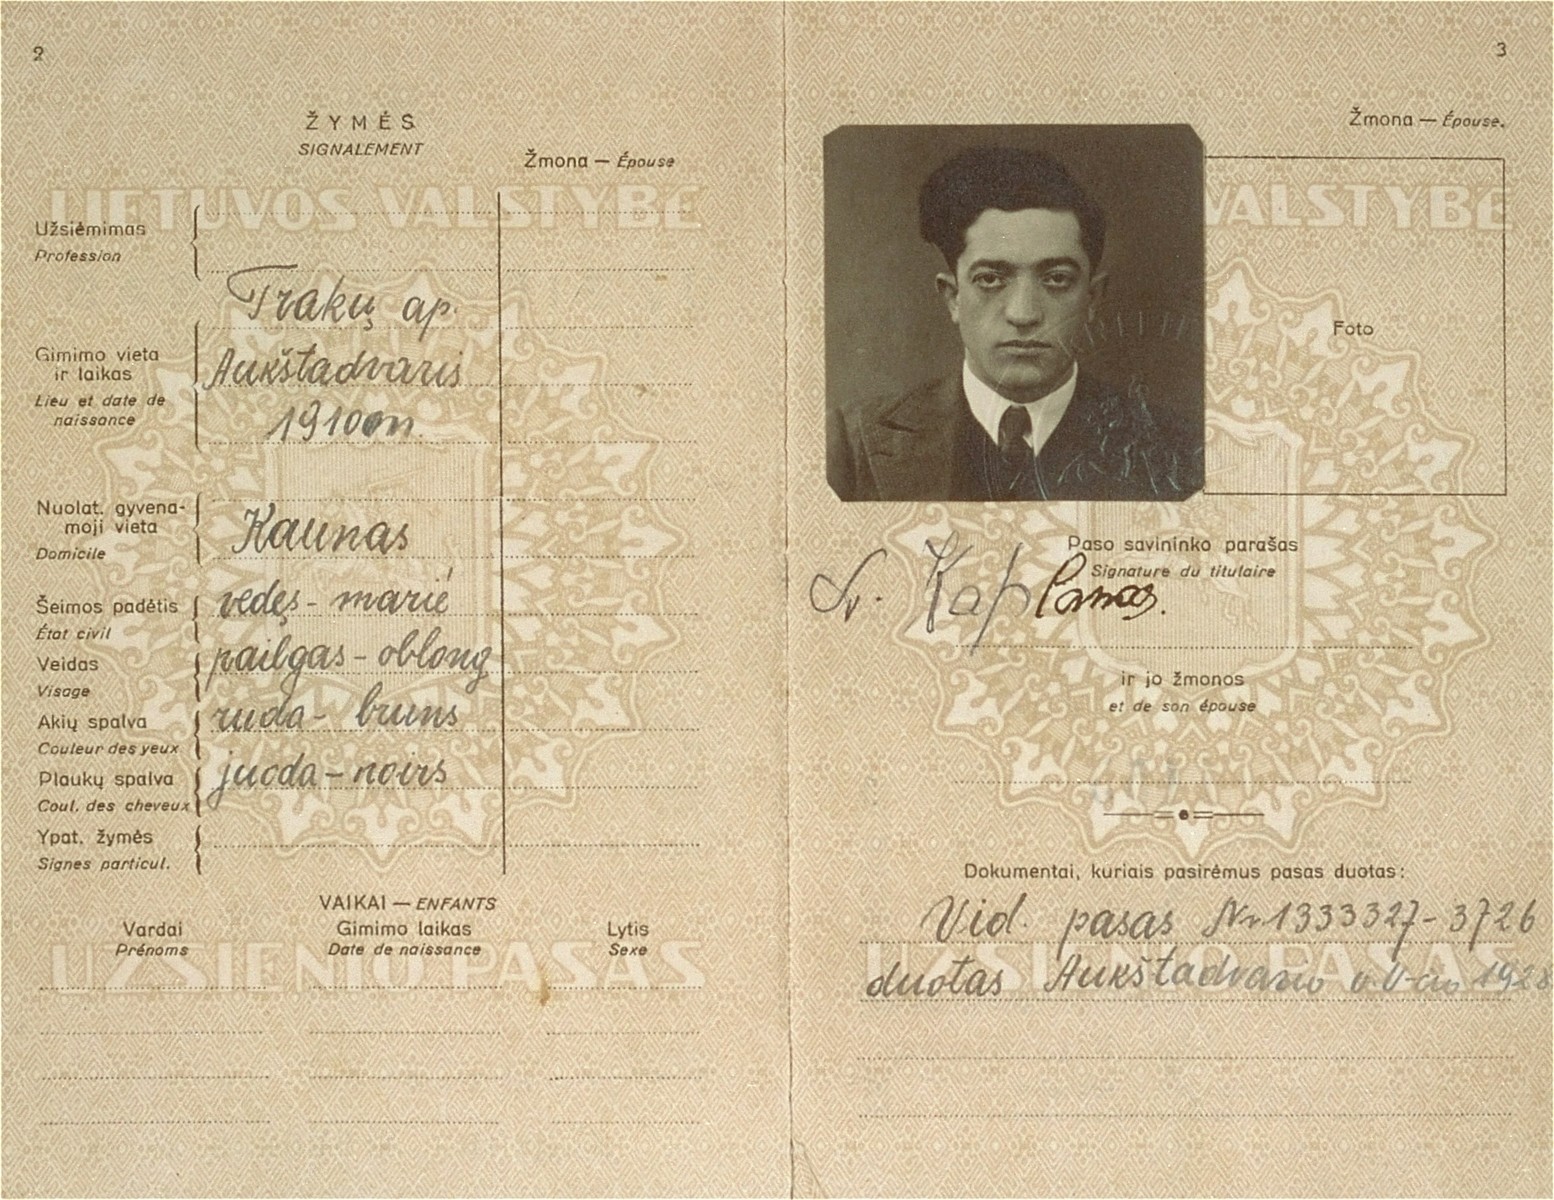 Lithuanian passport of Eliezer Kaplan (Lazarus Kaplanas) with the various visa stamps he required for his emigration from Lithuania to the United States in the fall of 1939.